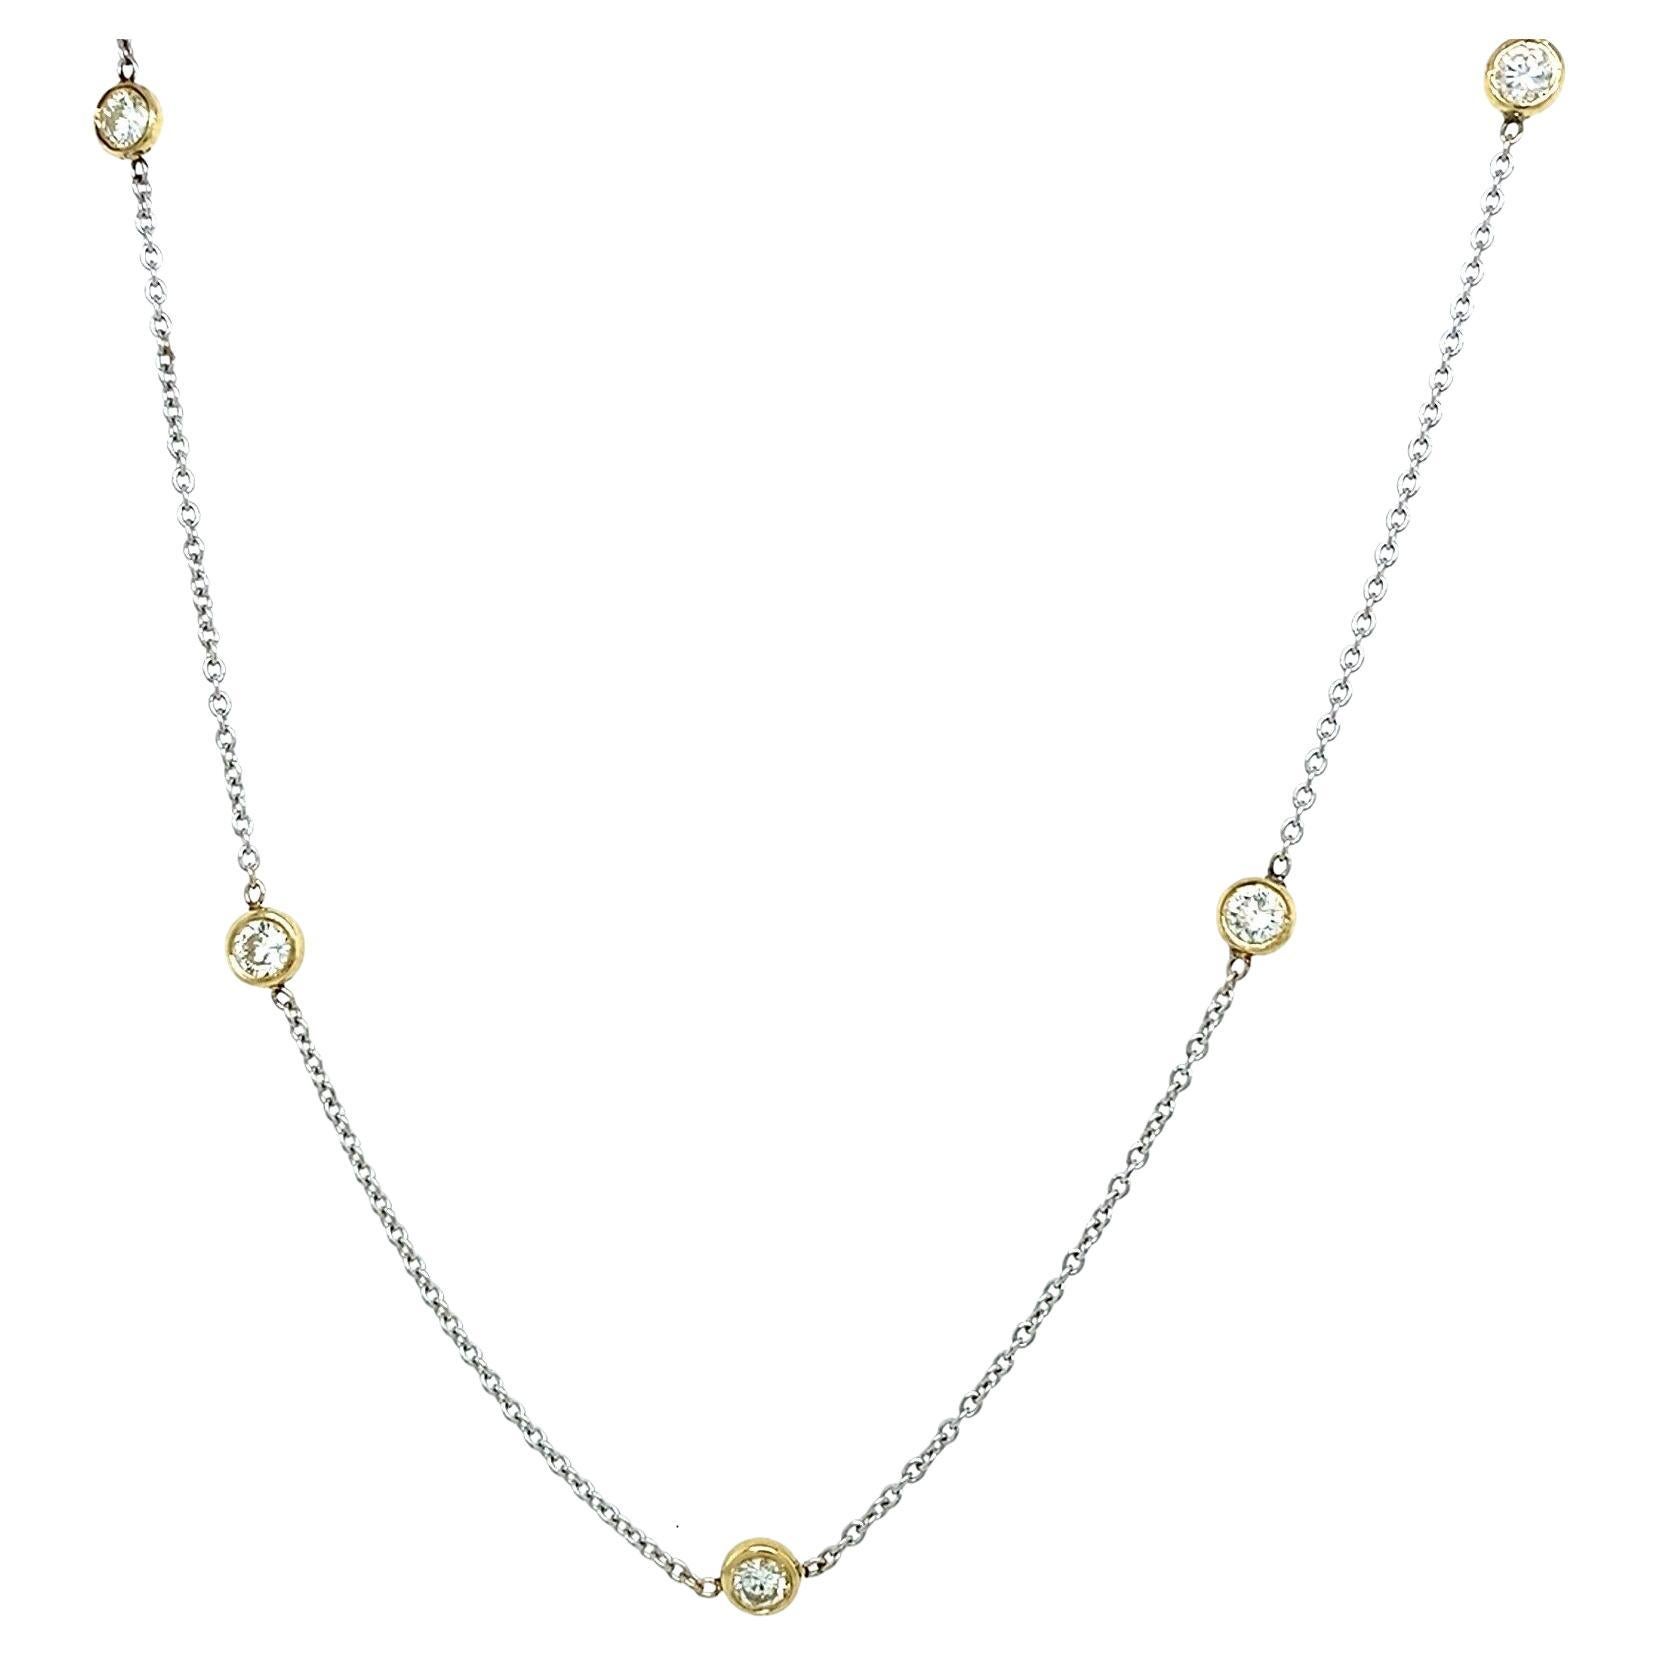 10-Stone Rubover Necklace Set with 1.60ct G/H SI Diamonds in 14ct White Gold For Sale